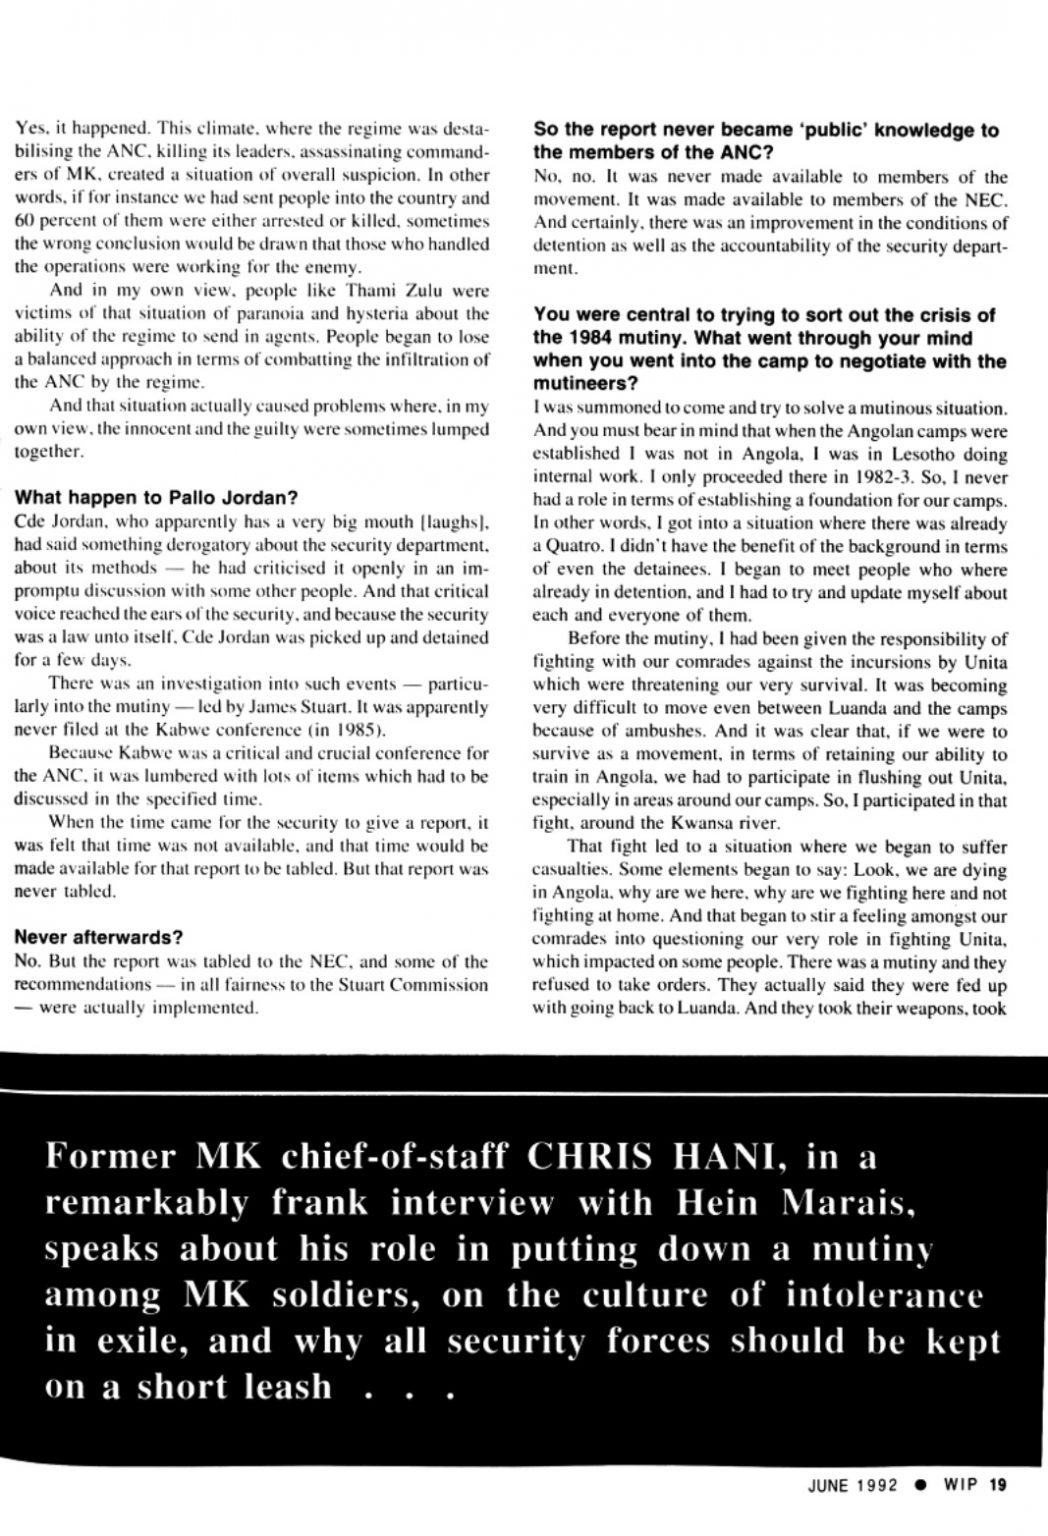 Article from Work in Progress magazine from June 1992 on Chris Hani, second page..